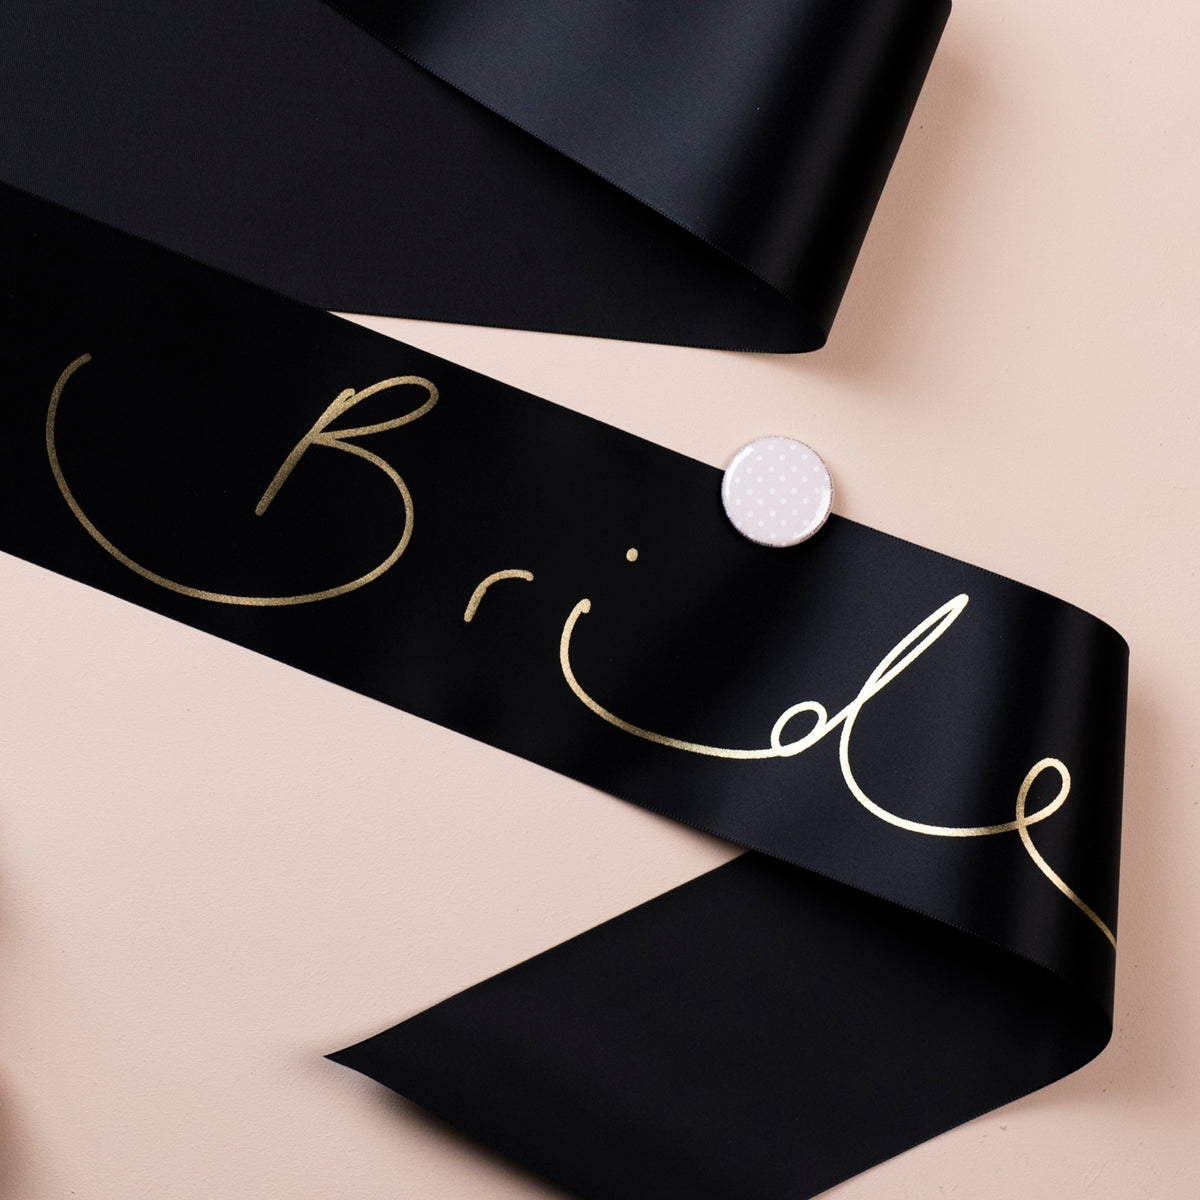 'The Bride' Gold Foil Hand Lettered Hen Party Sash - Choice of Colours